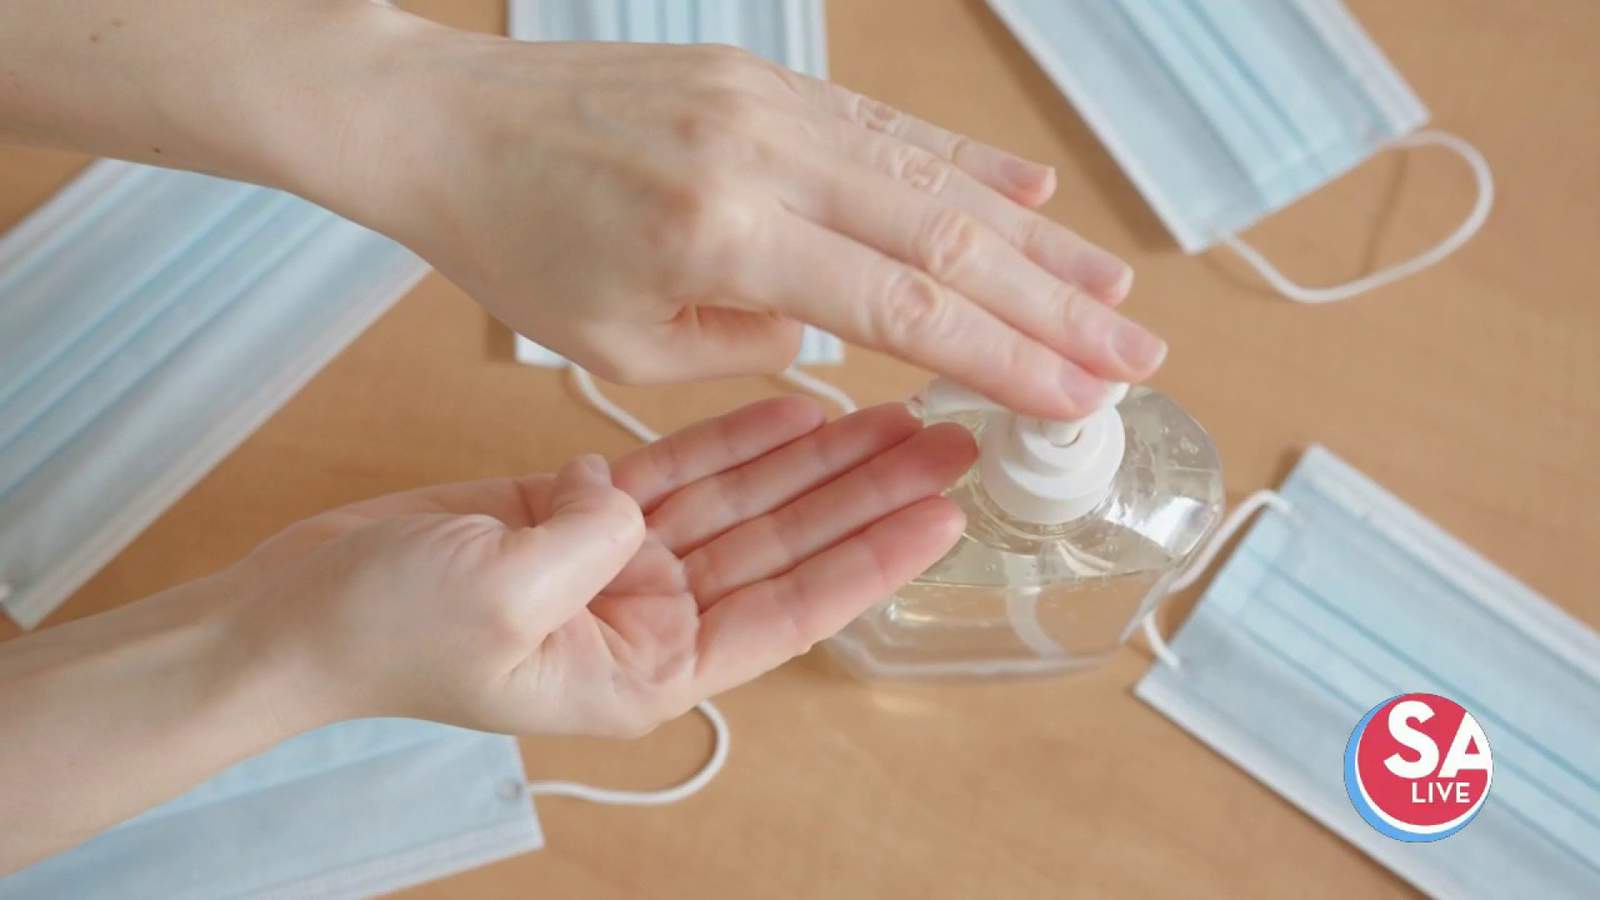 Is your hand sanitizer hiding something toxic?